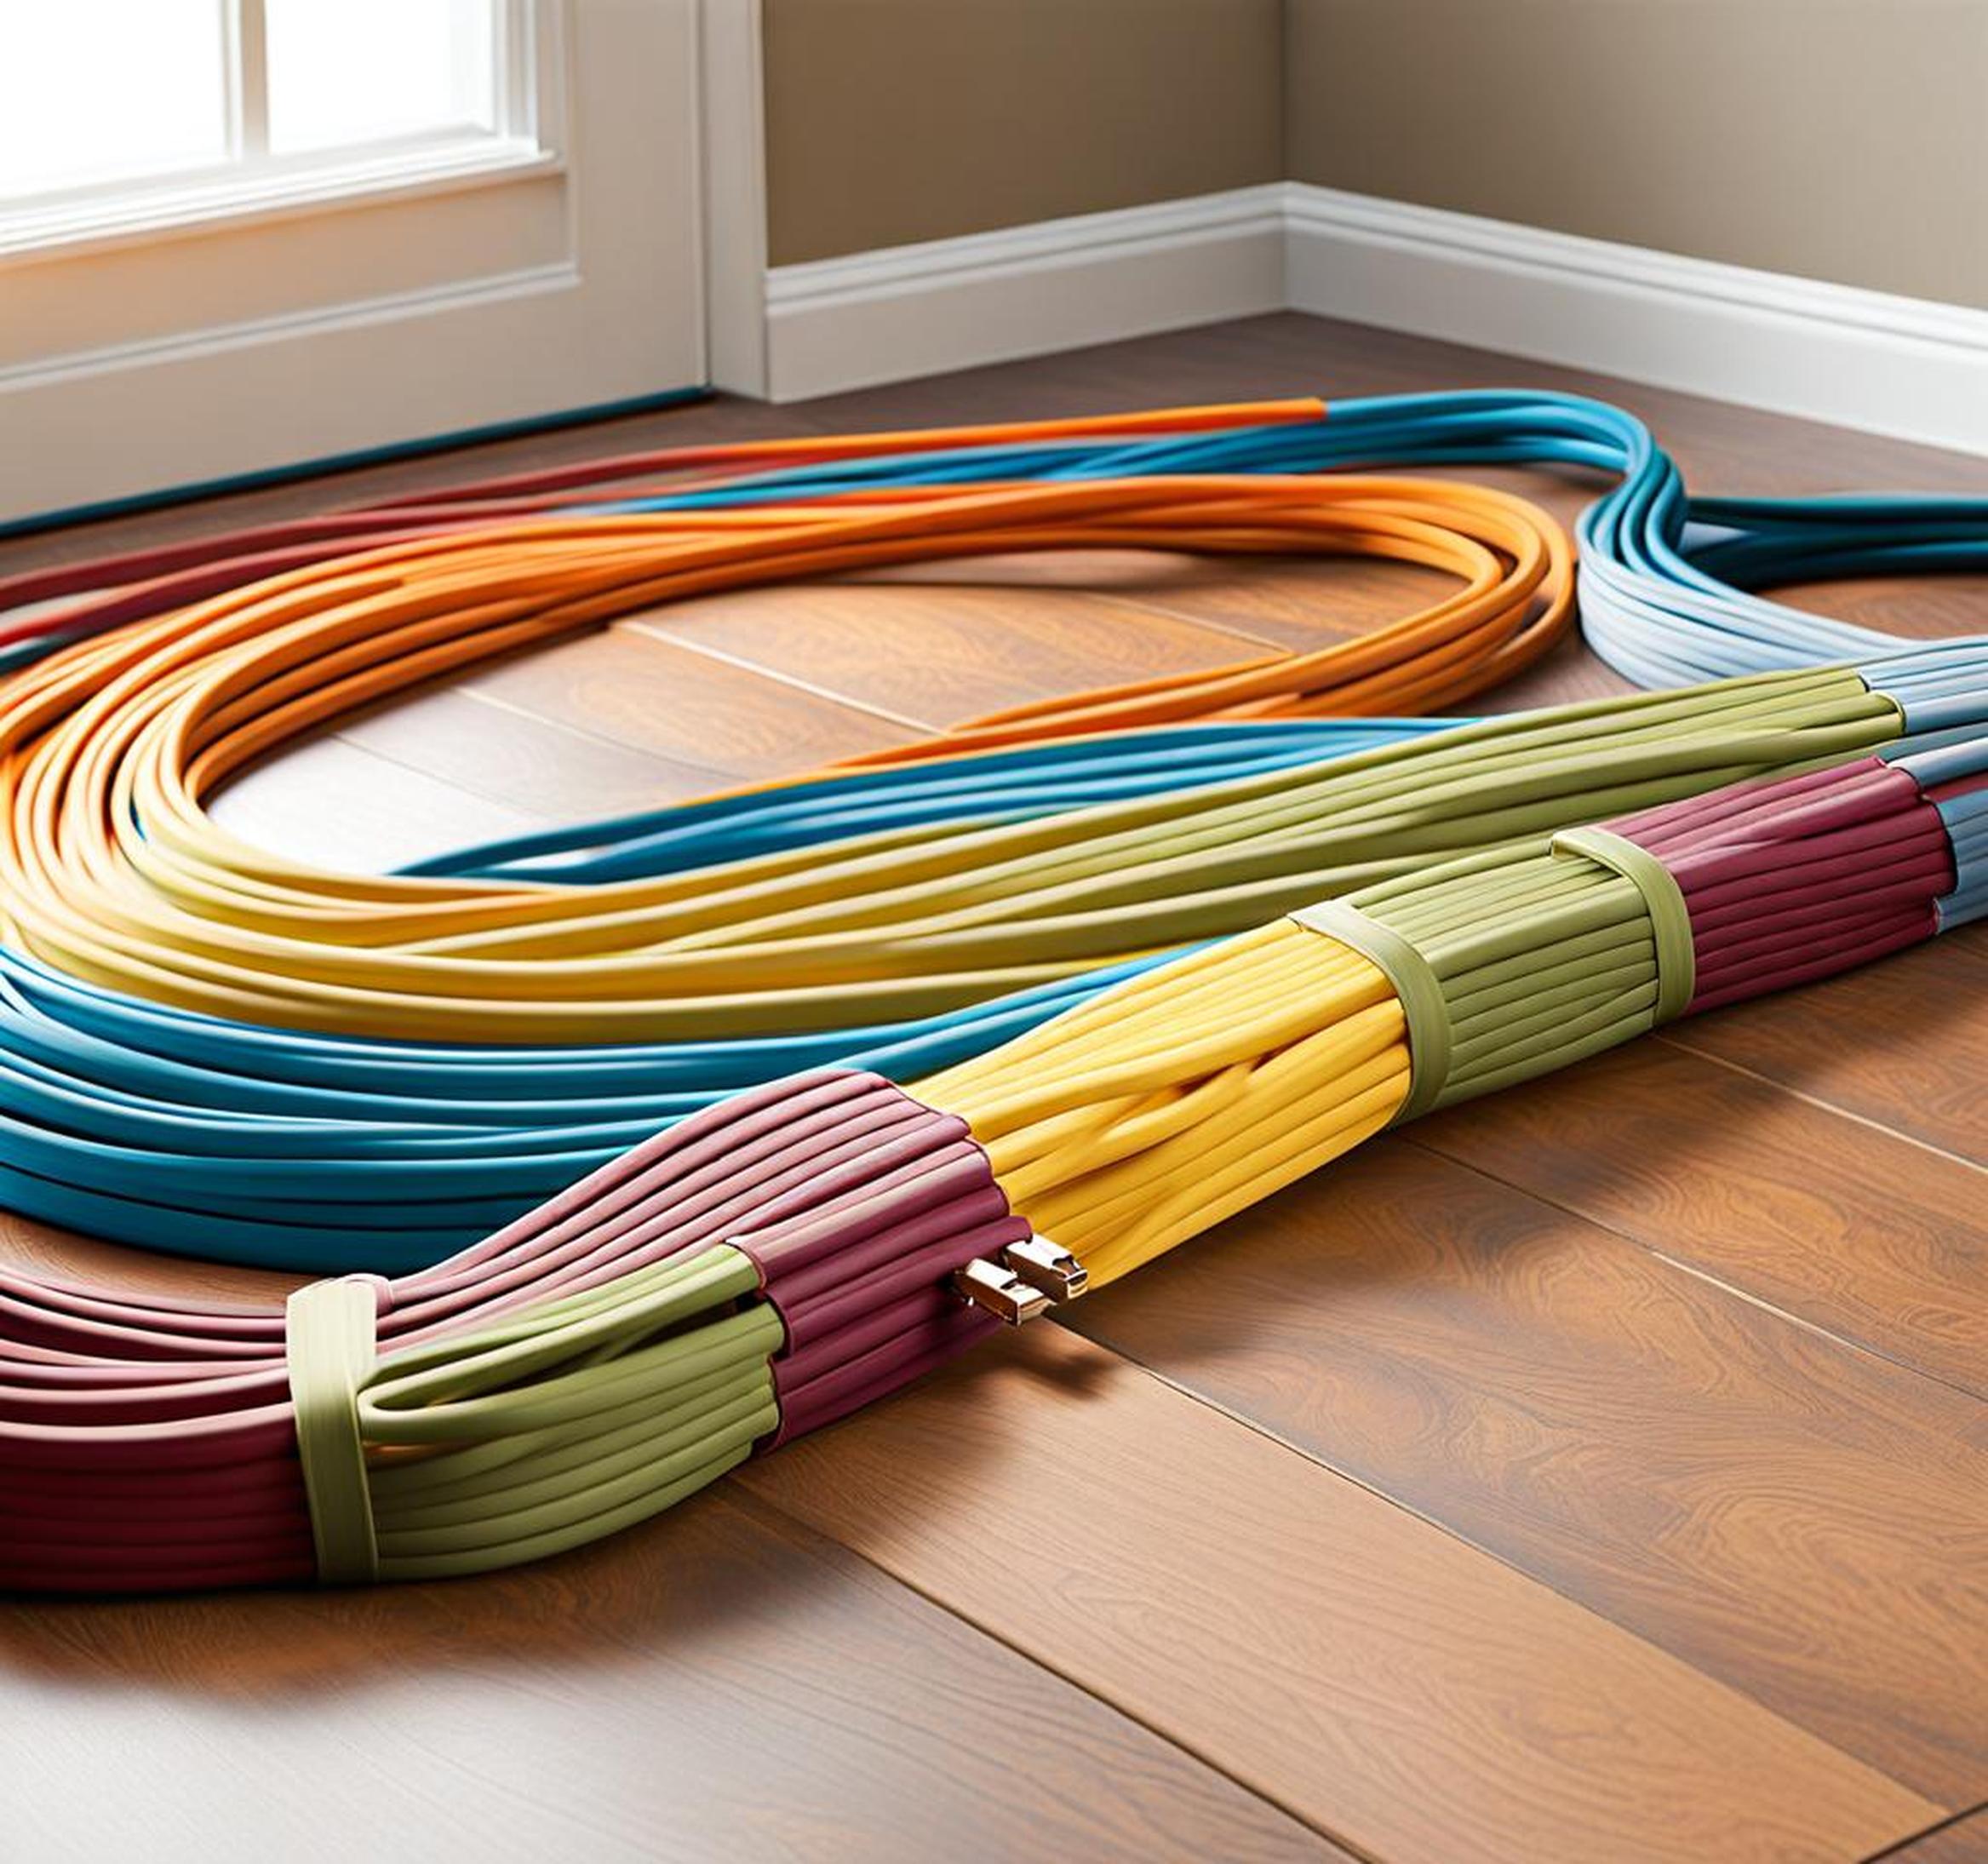 flat extension cords for under rugs